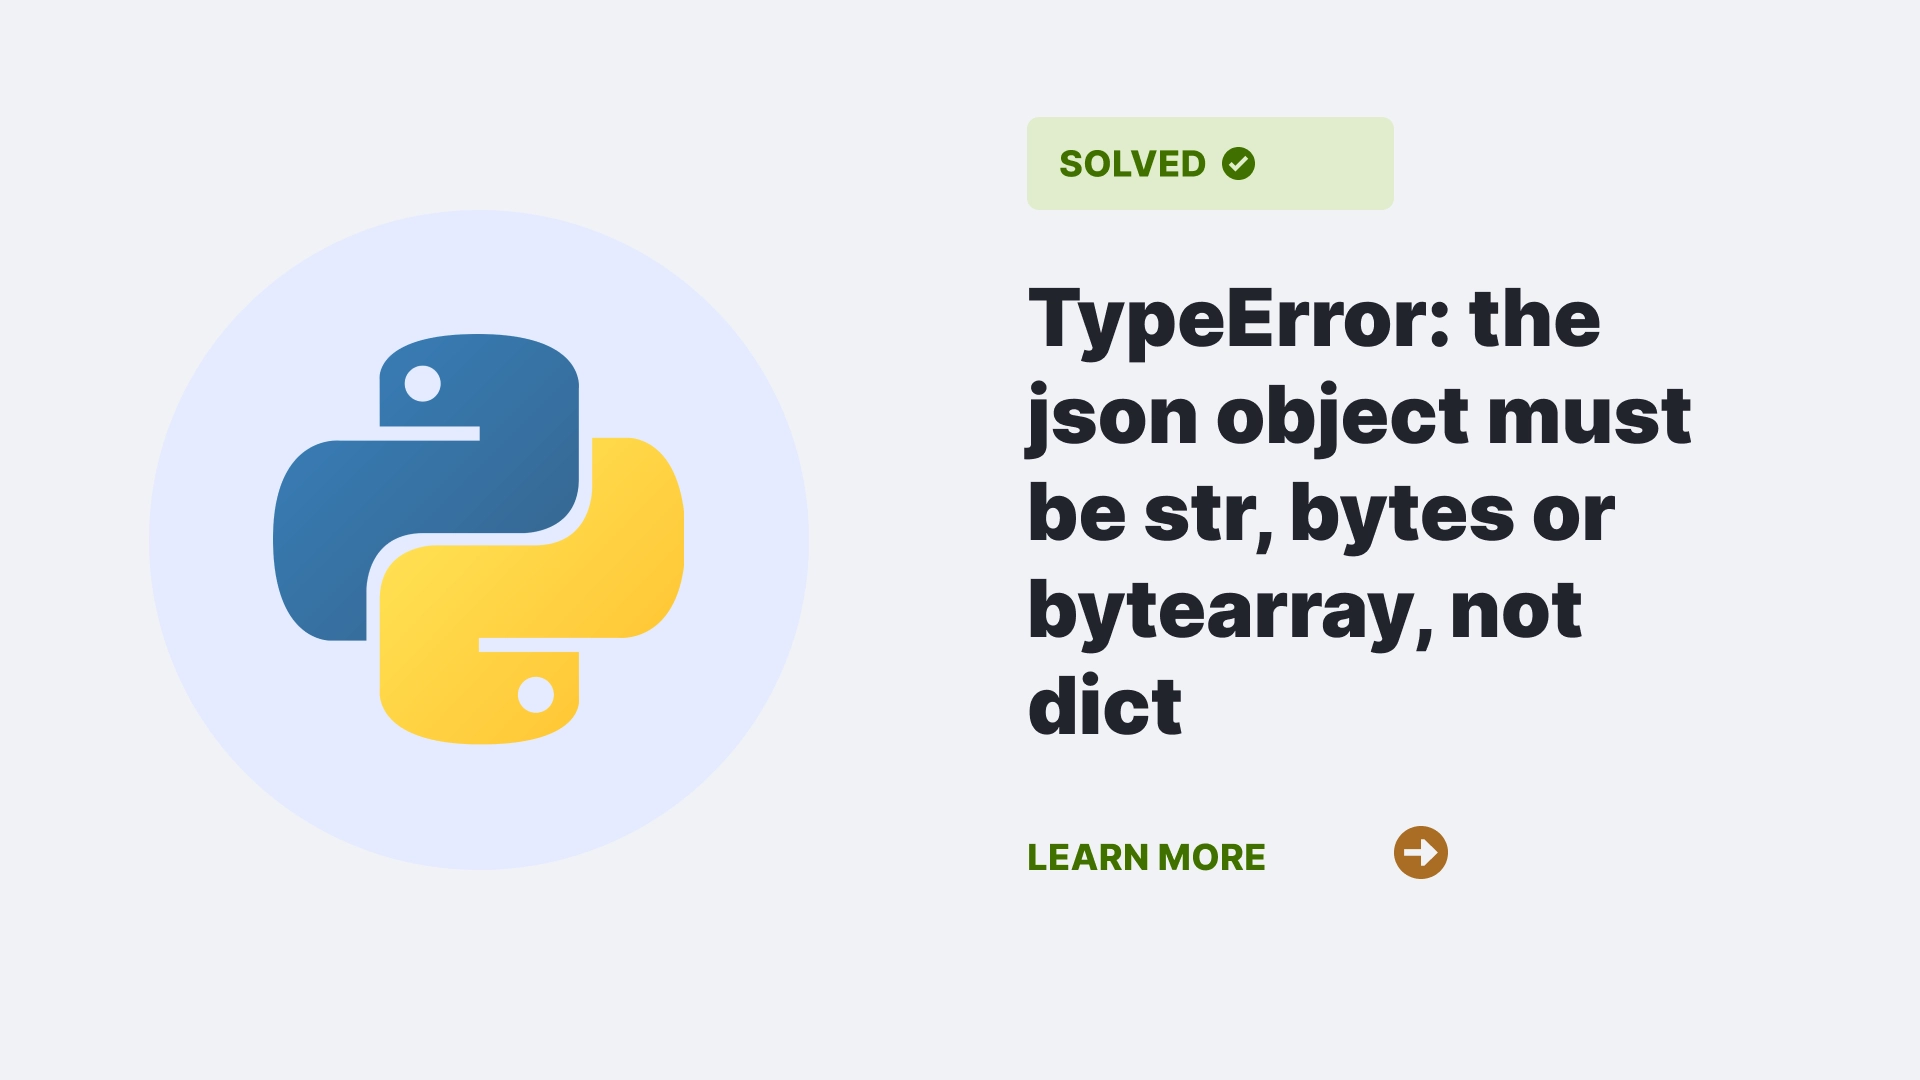 TypeError: the json object must be str, bytes or bytearray, not dict